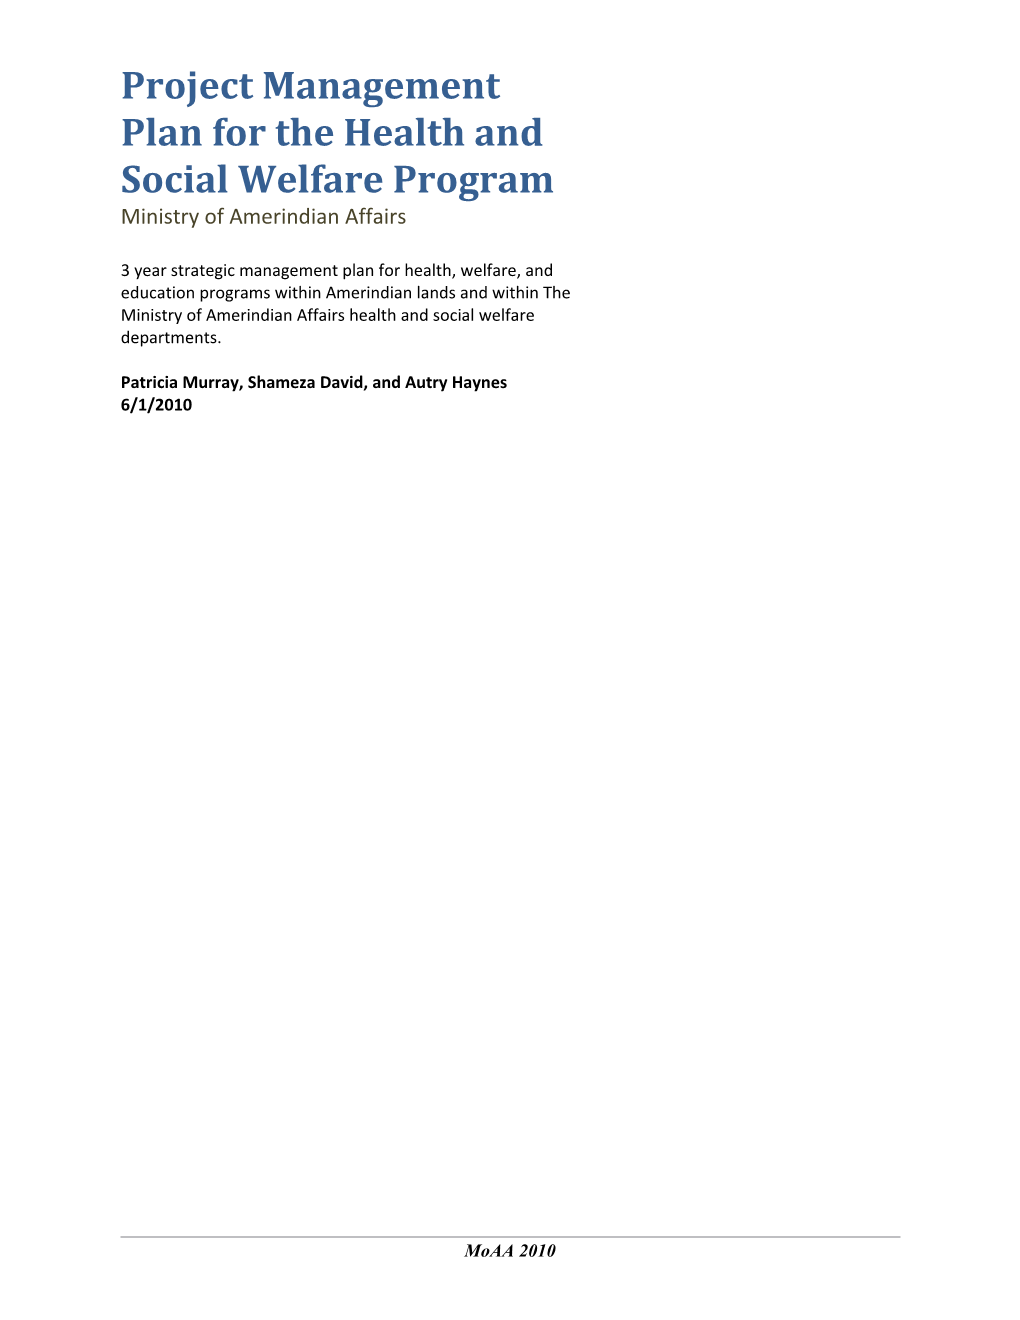 Project Management Plan for the Health and Social Welfare Program